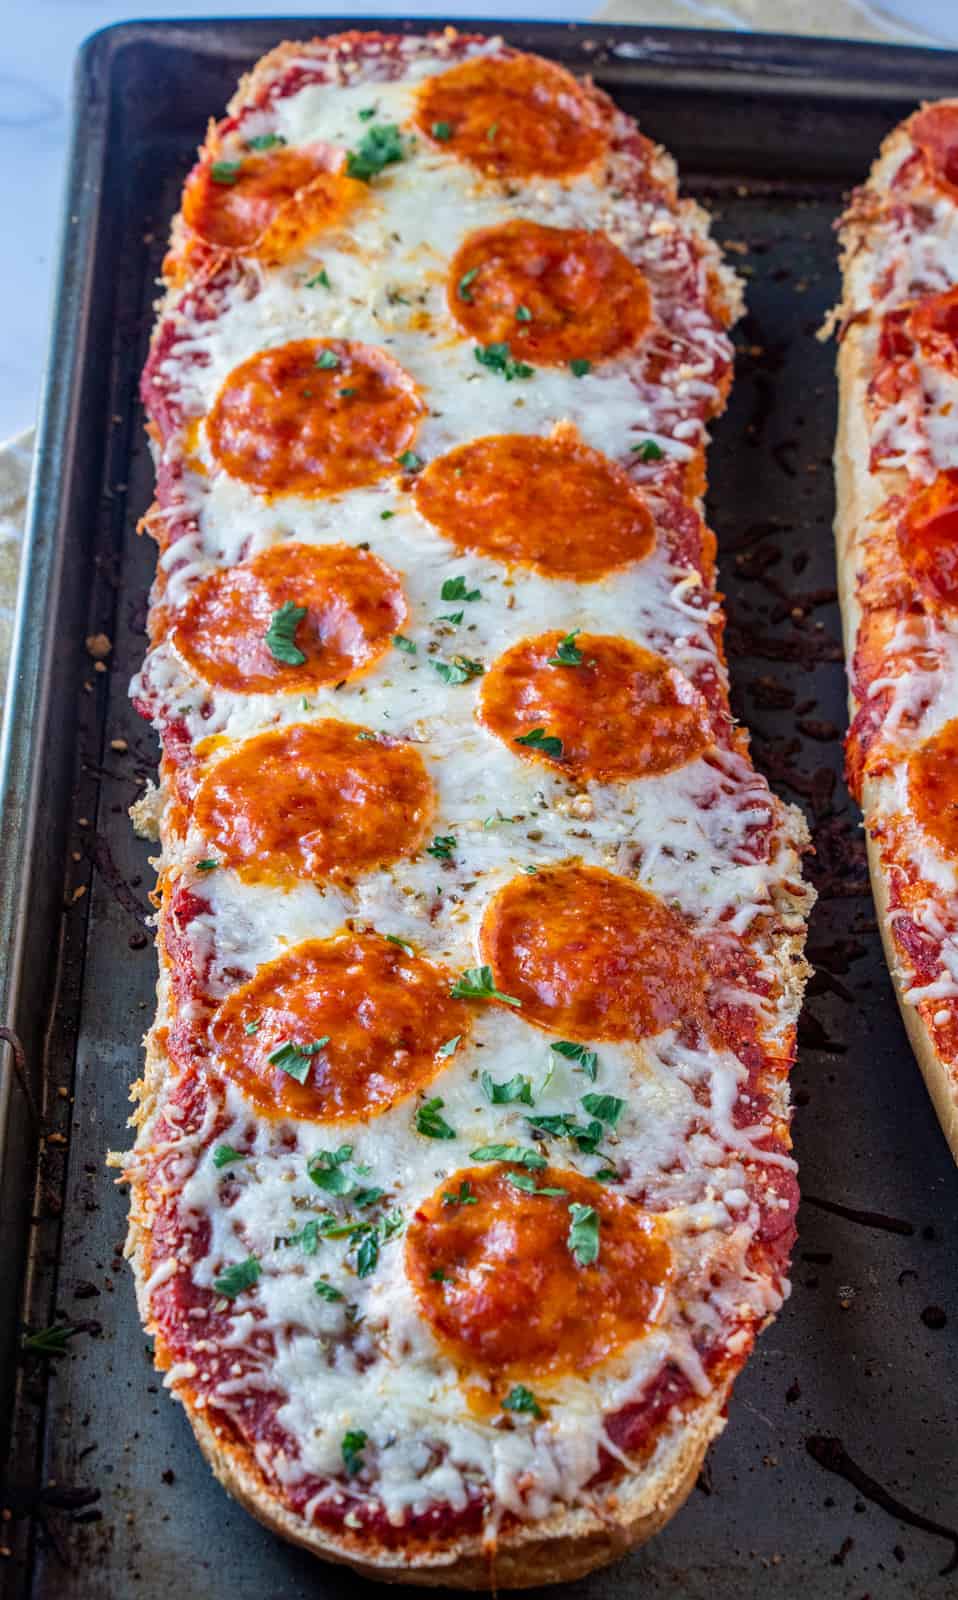 Baked pizza on baking pan right out of oven